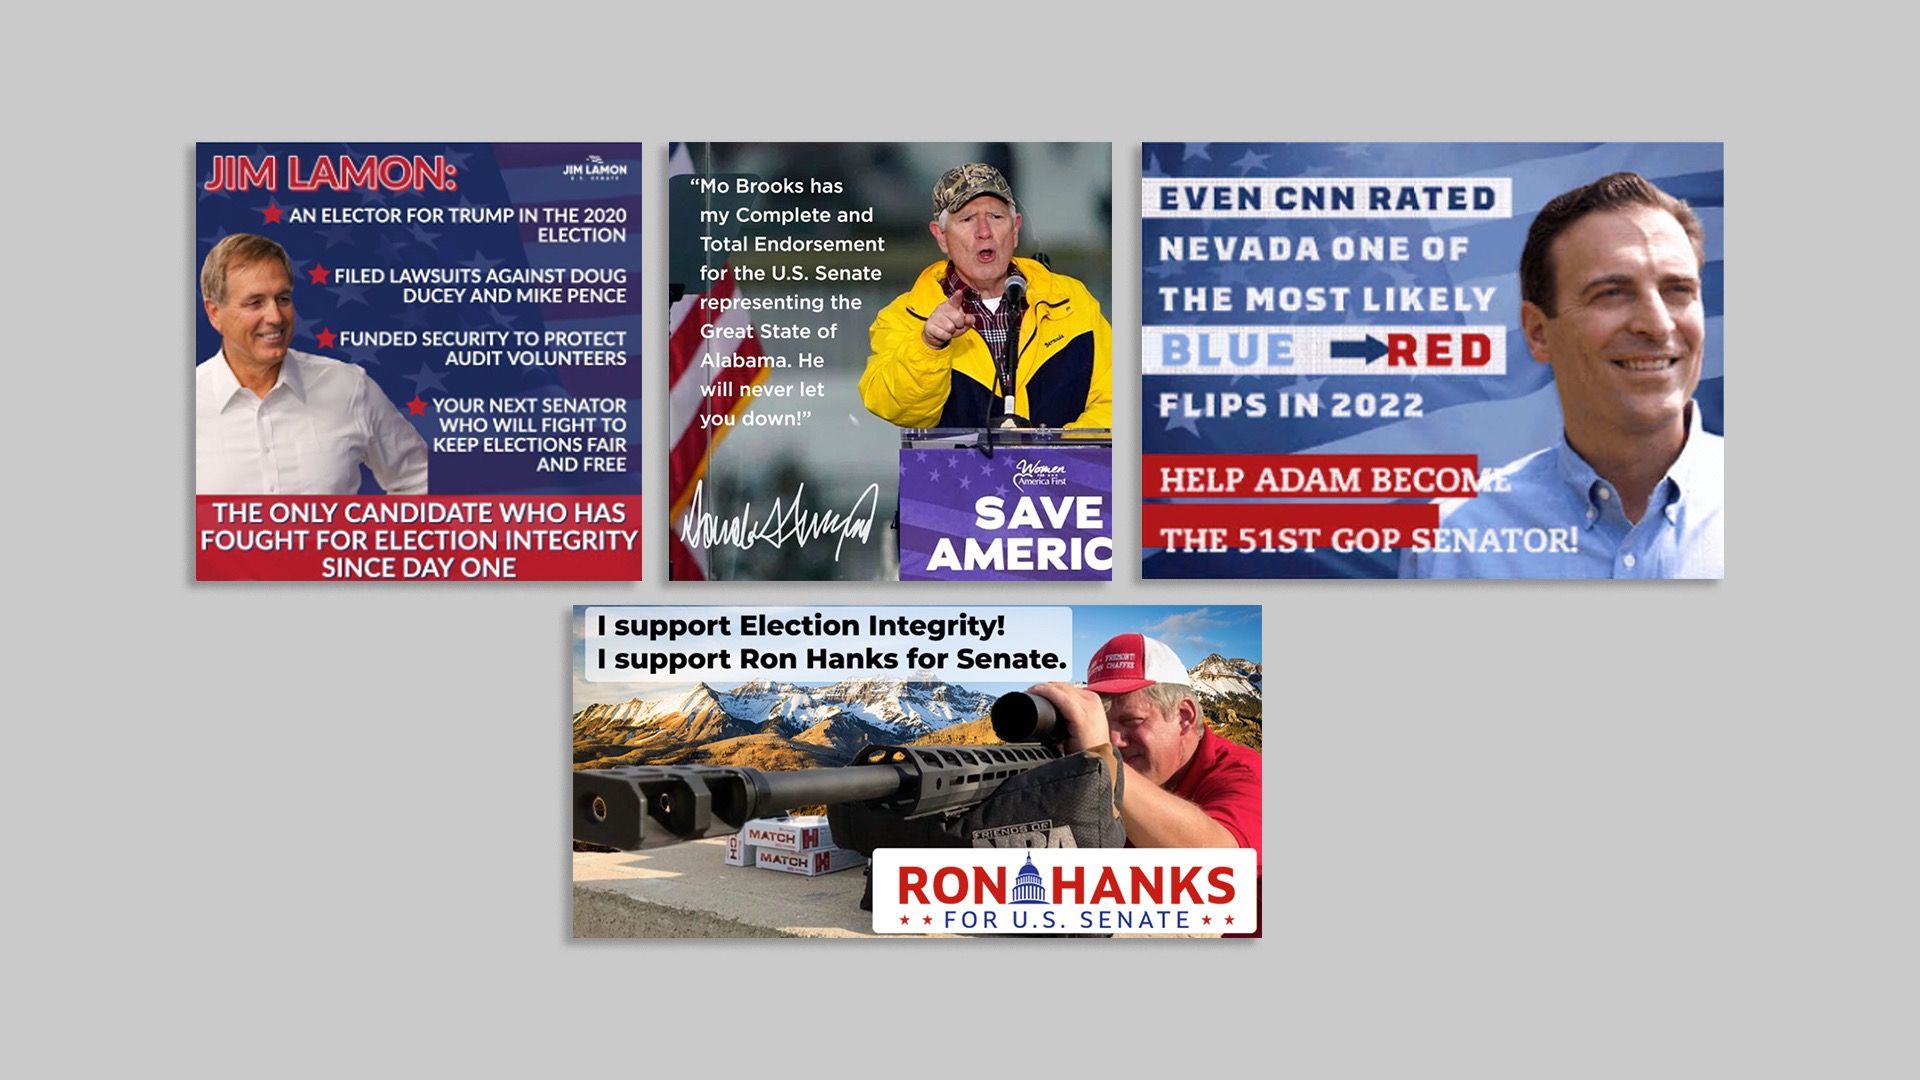 Screen grabs of ads from the Senate candidates’ campaigns. Compilation by Axios Aïda Amer